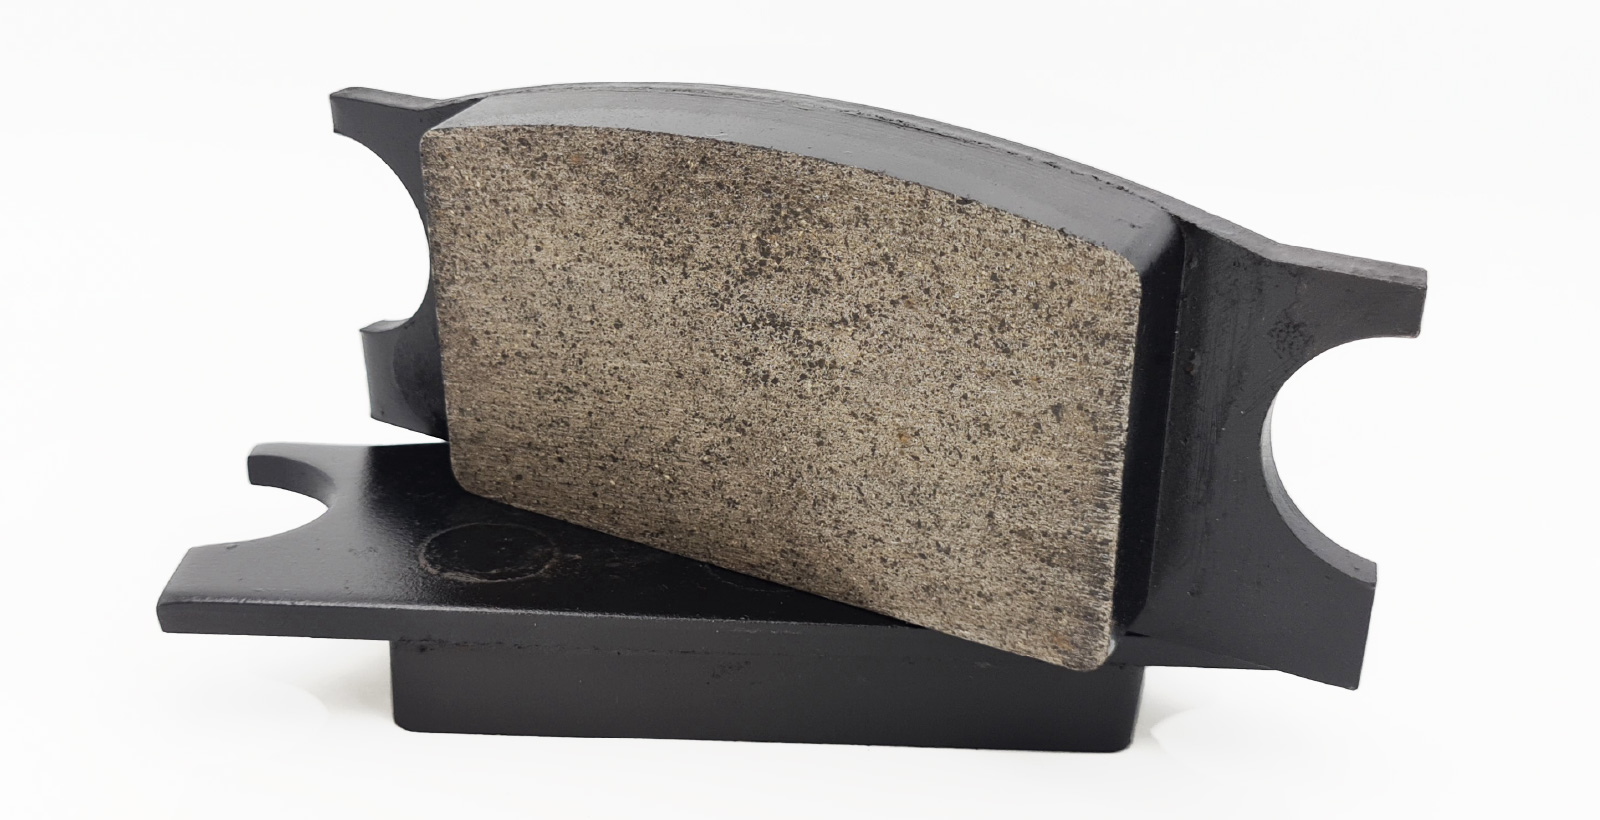 Off Highway Brake Pads for Maritime Industry